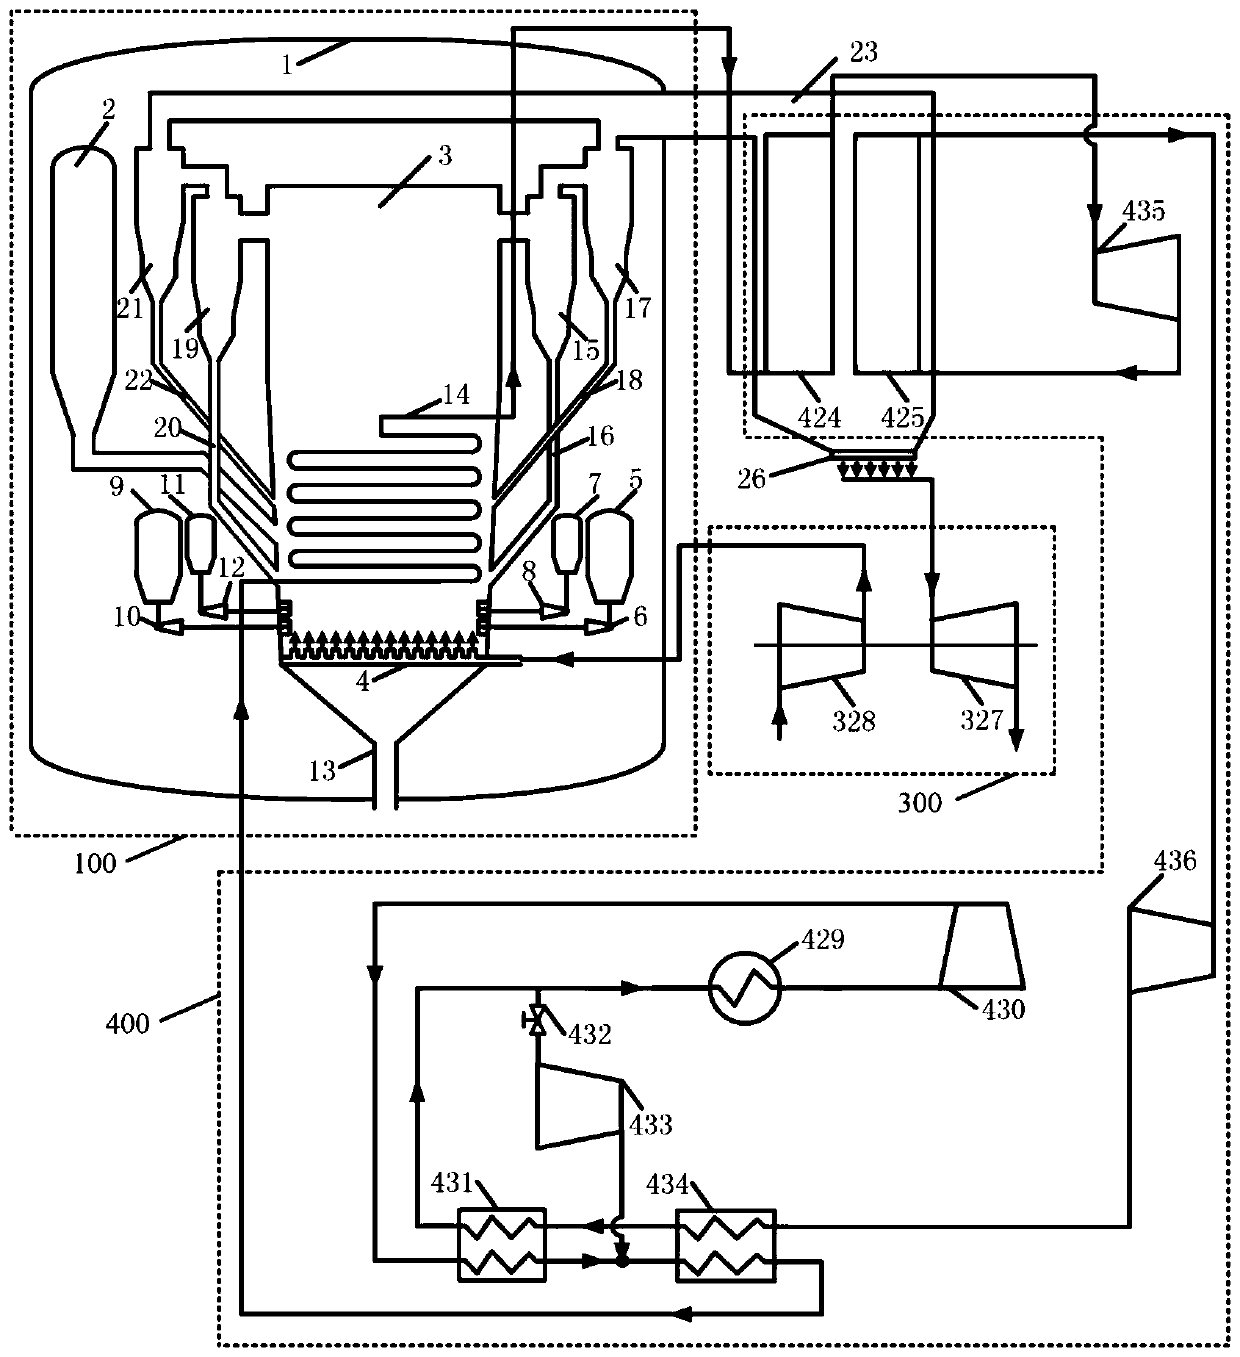 A pressurized fluidized bed boiler s-co  <sub>2</sub> Cycle power generation system and method